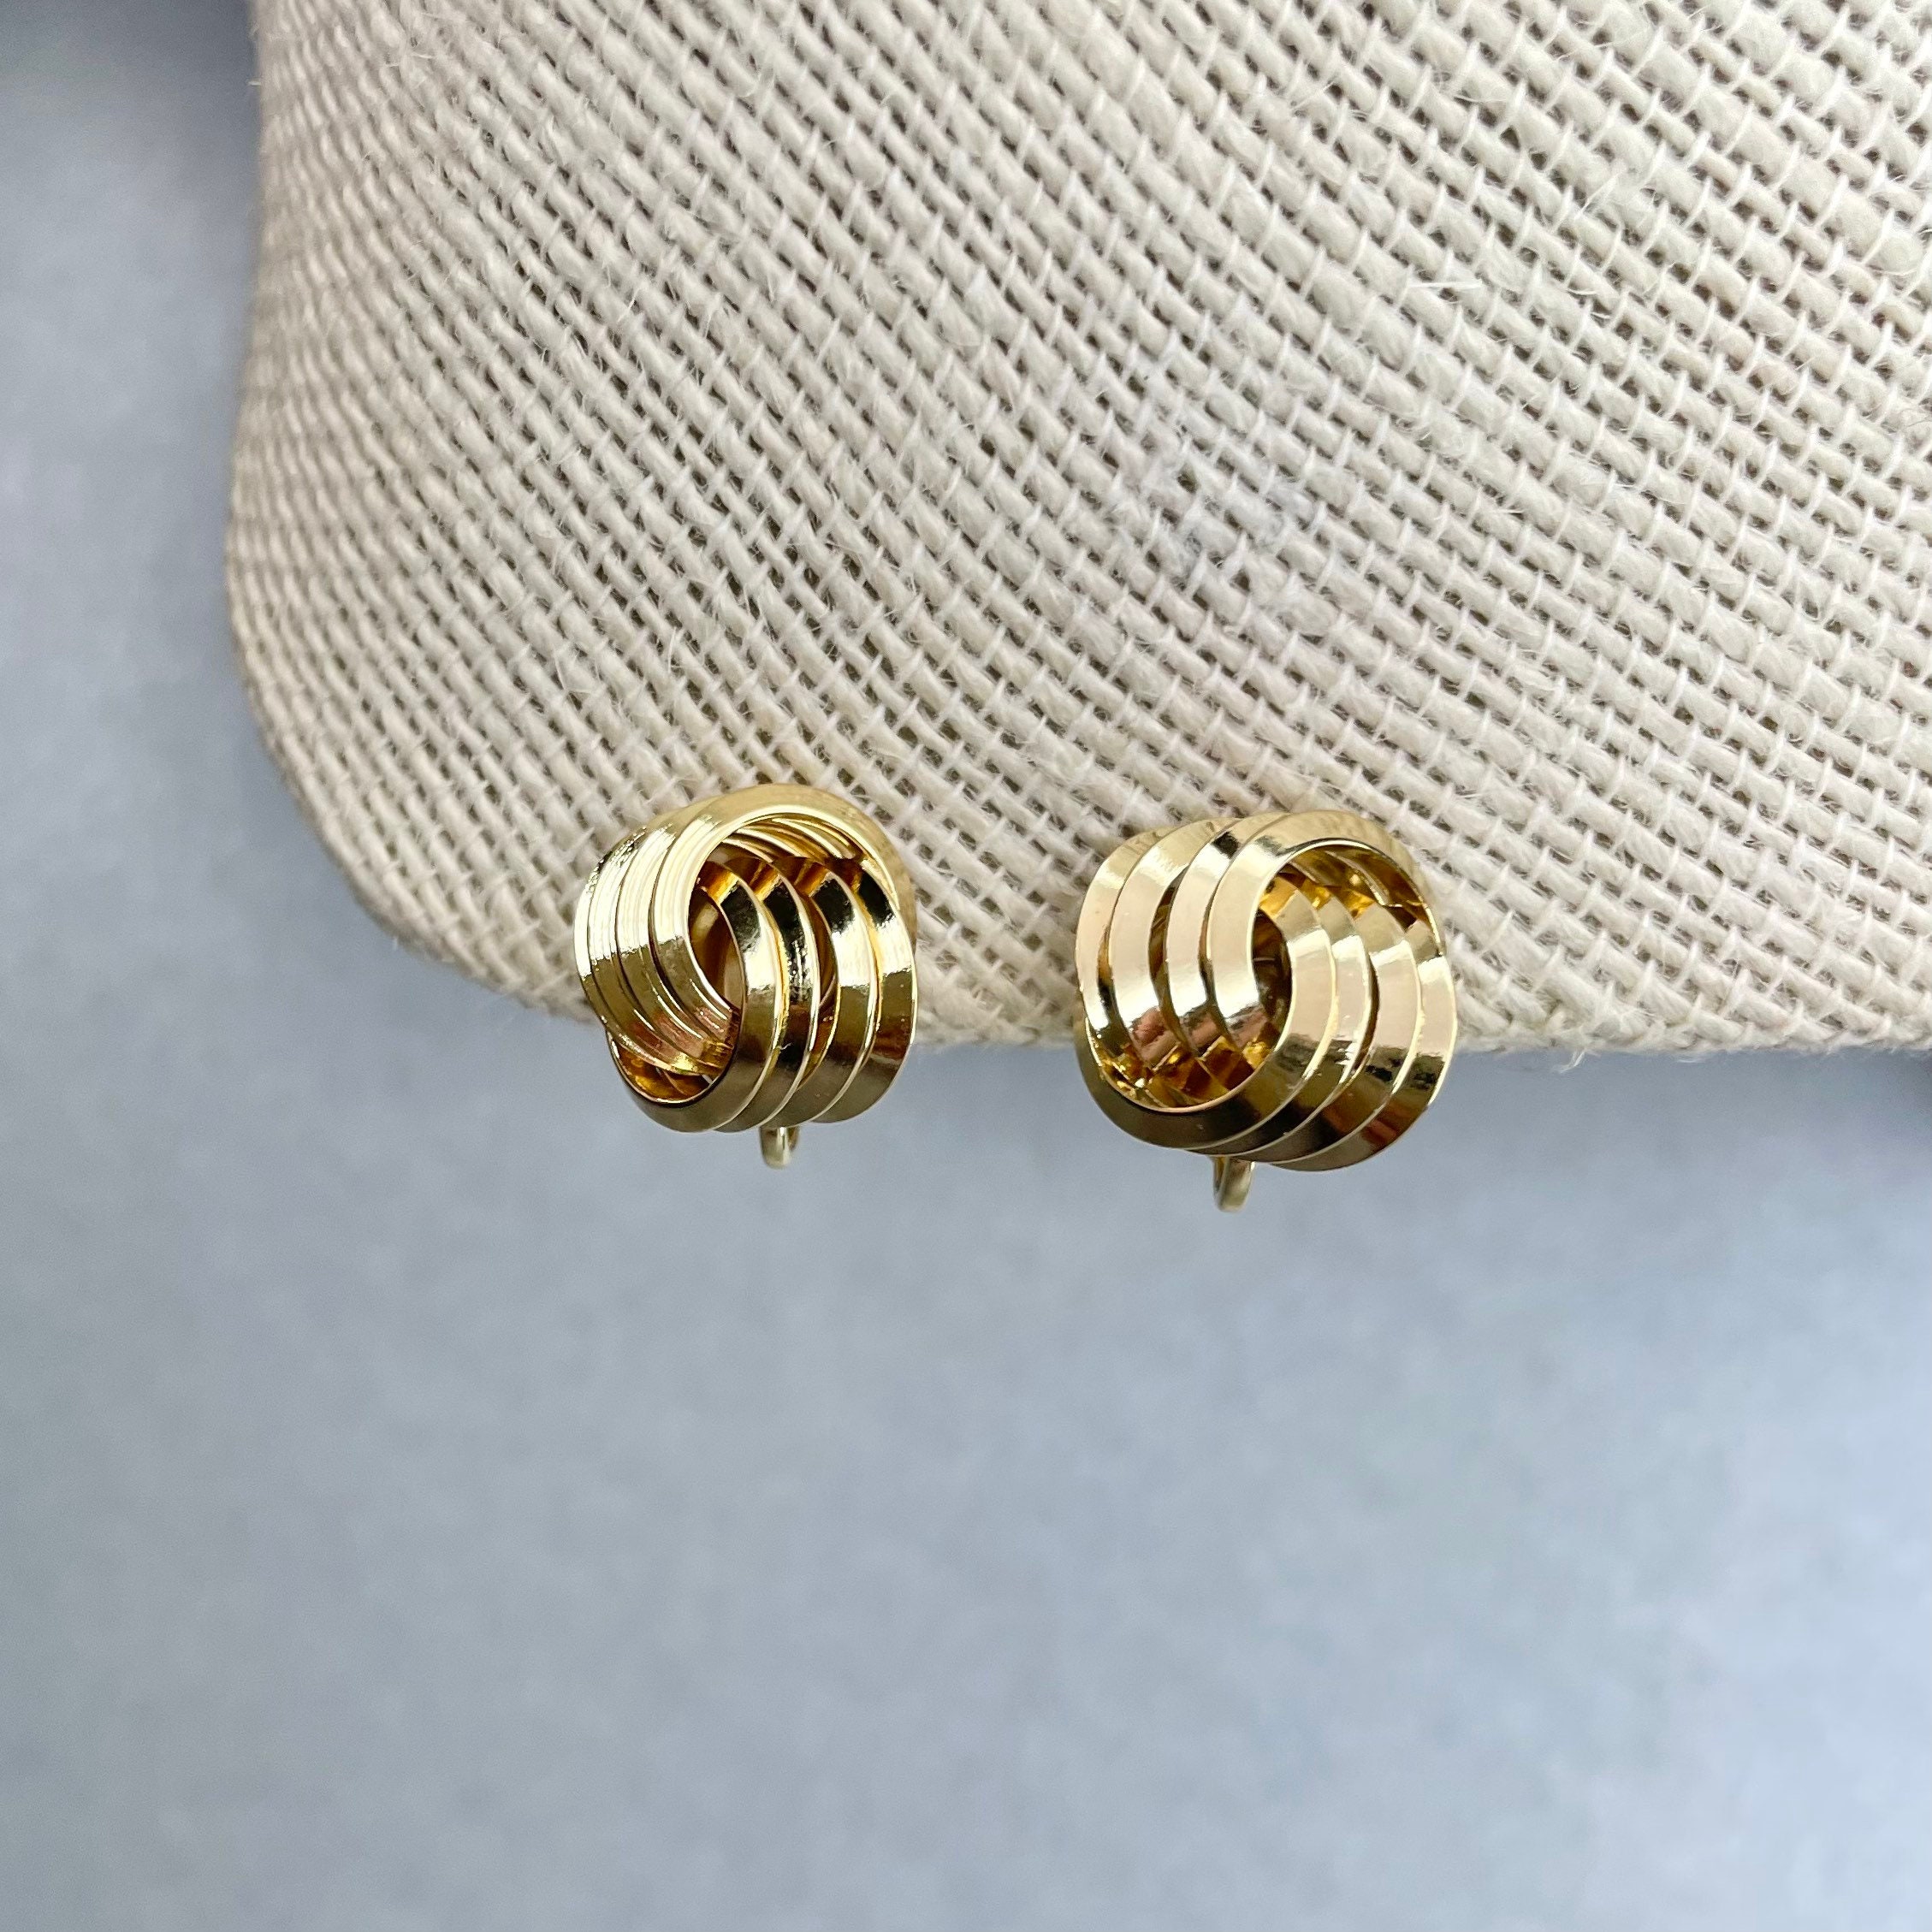 Vintage Trifari TM Wide Wire Knot Earrings Gold Tone Twisted - Etsy